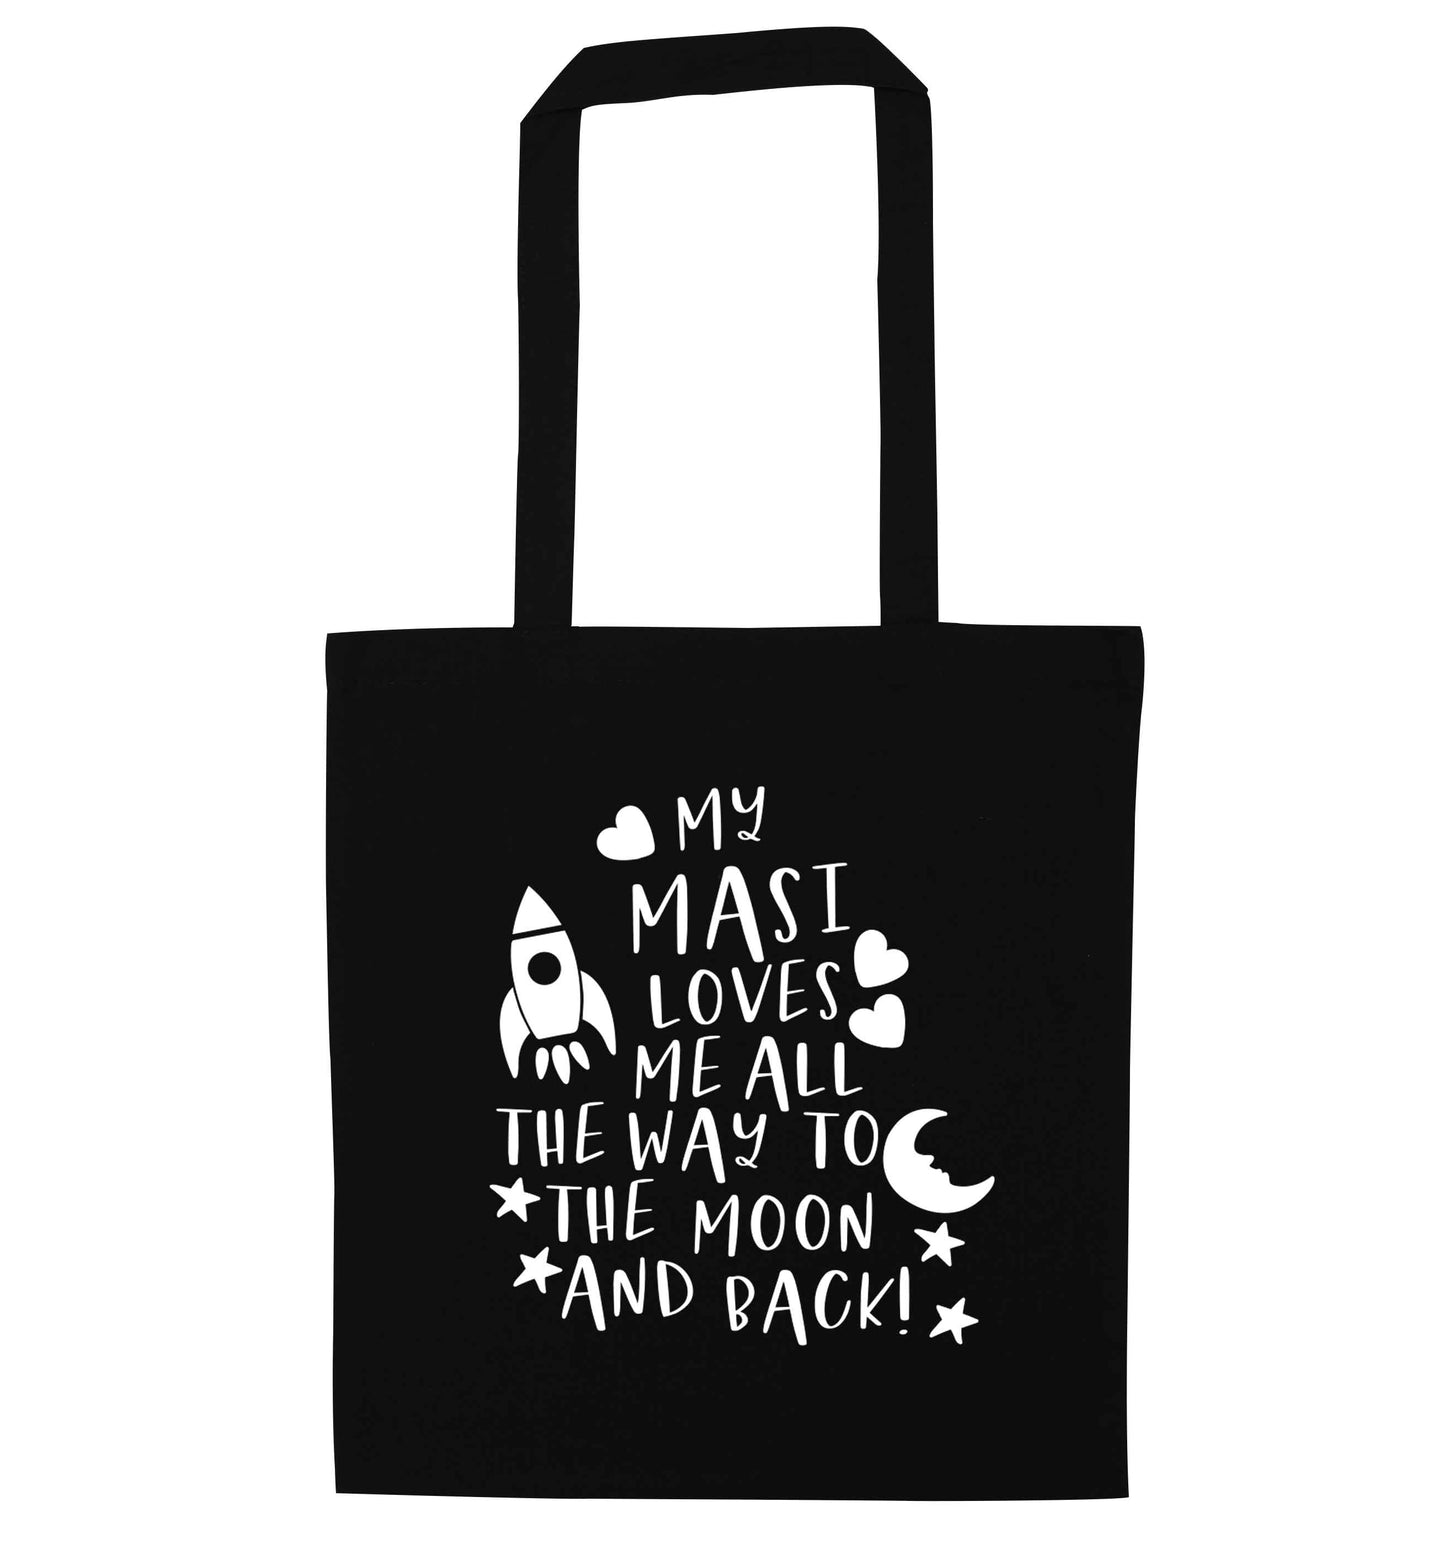 My masi loves me all the way to the moon and back black tote bag